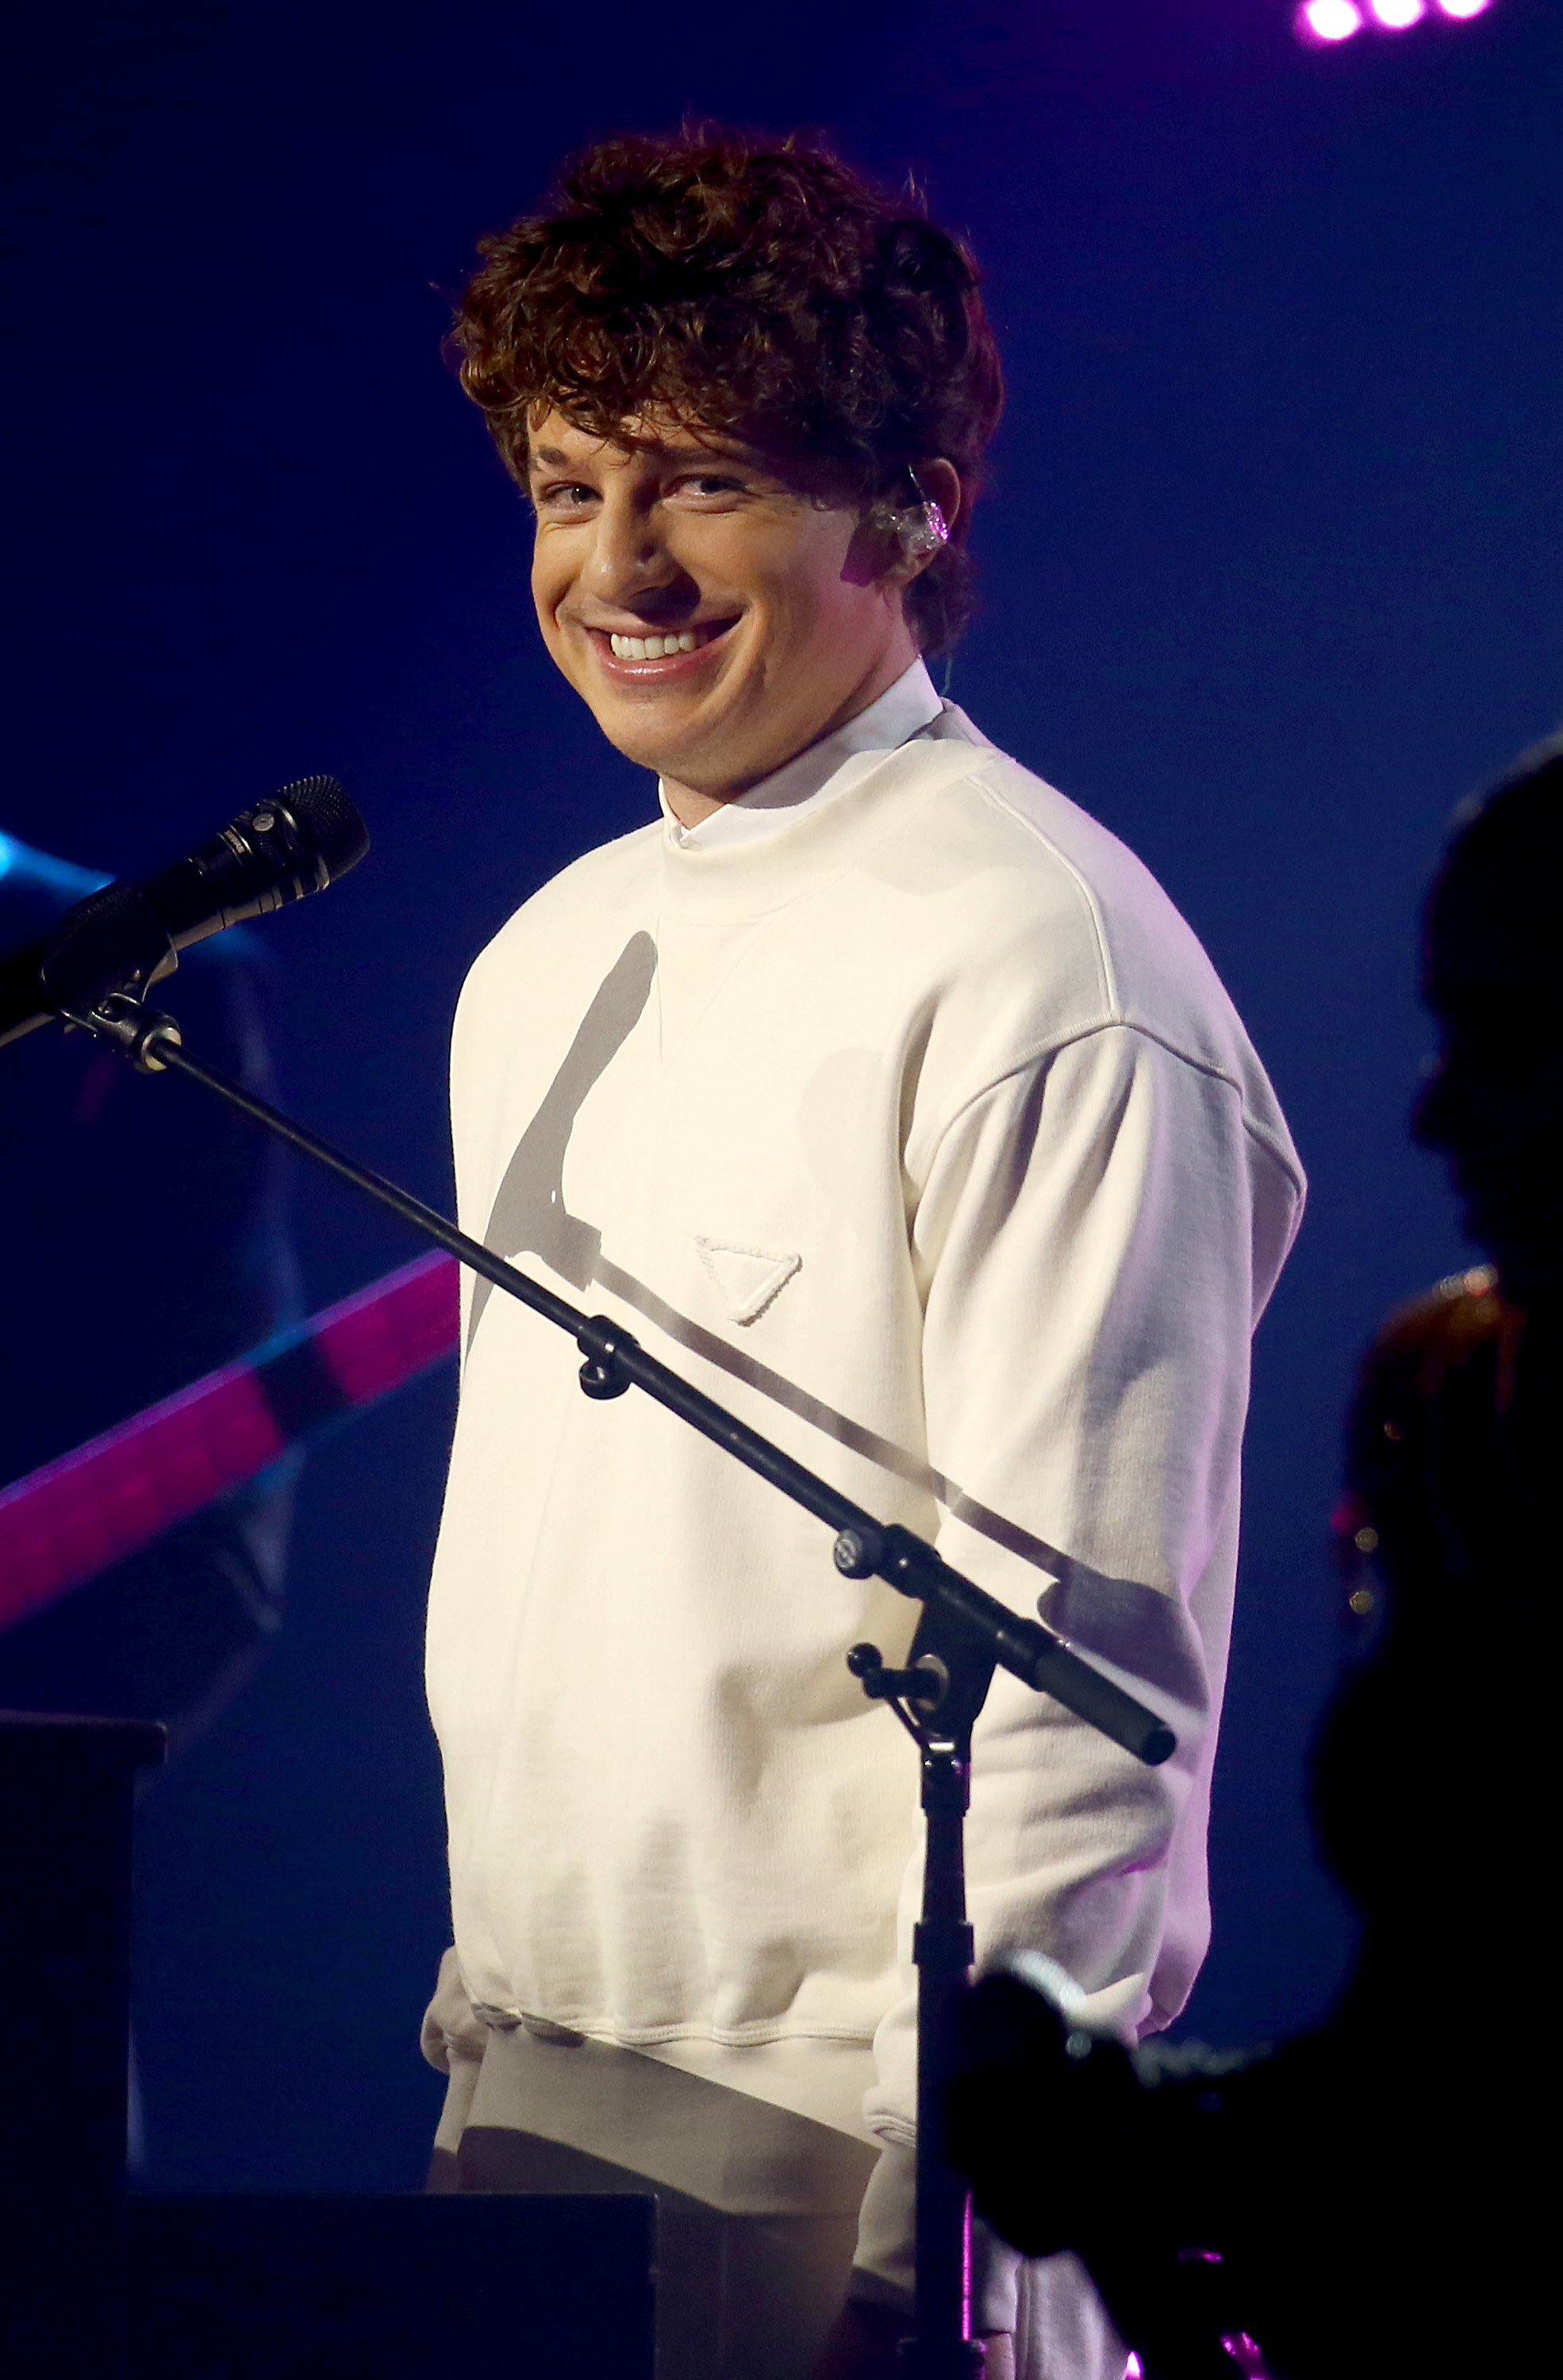 Charlie Puth  Attention  Phone wallpaper  Charlie puth Charlie puth  music Attention charlie puth